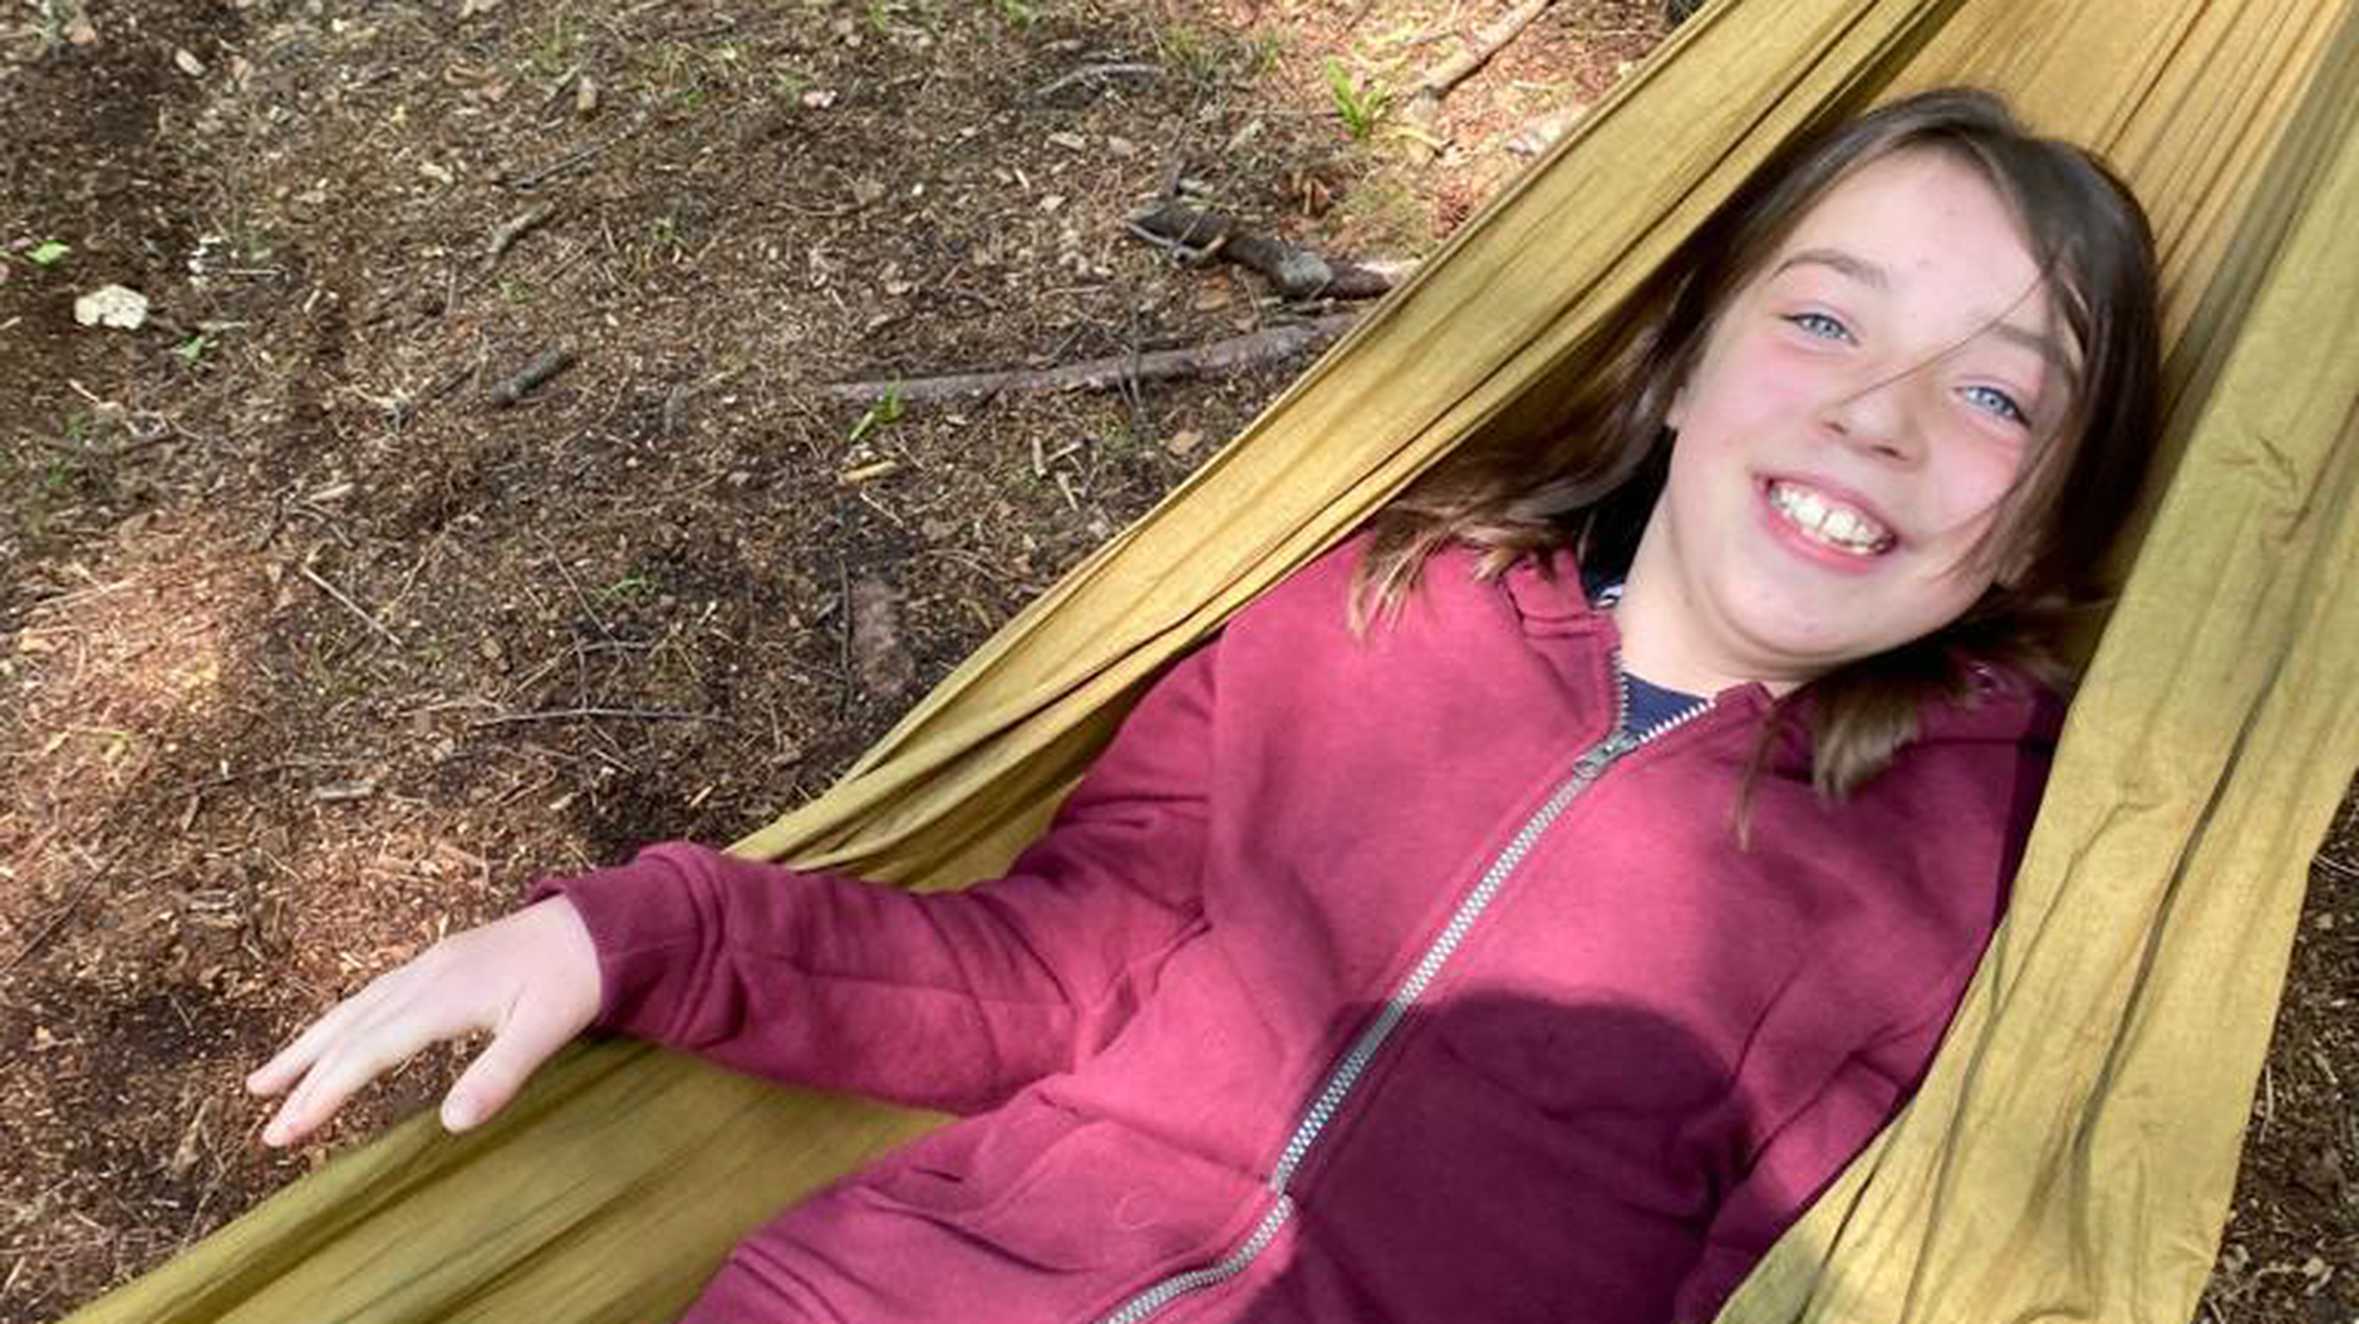 Emily laying in a hammock with a big smile on her face.